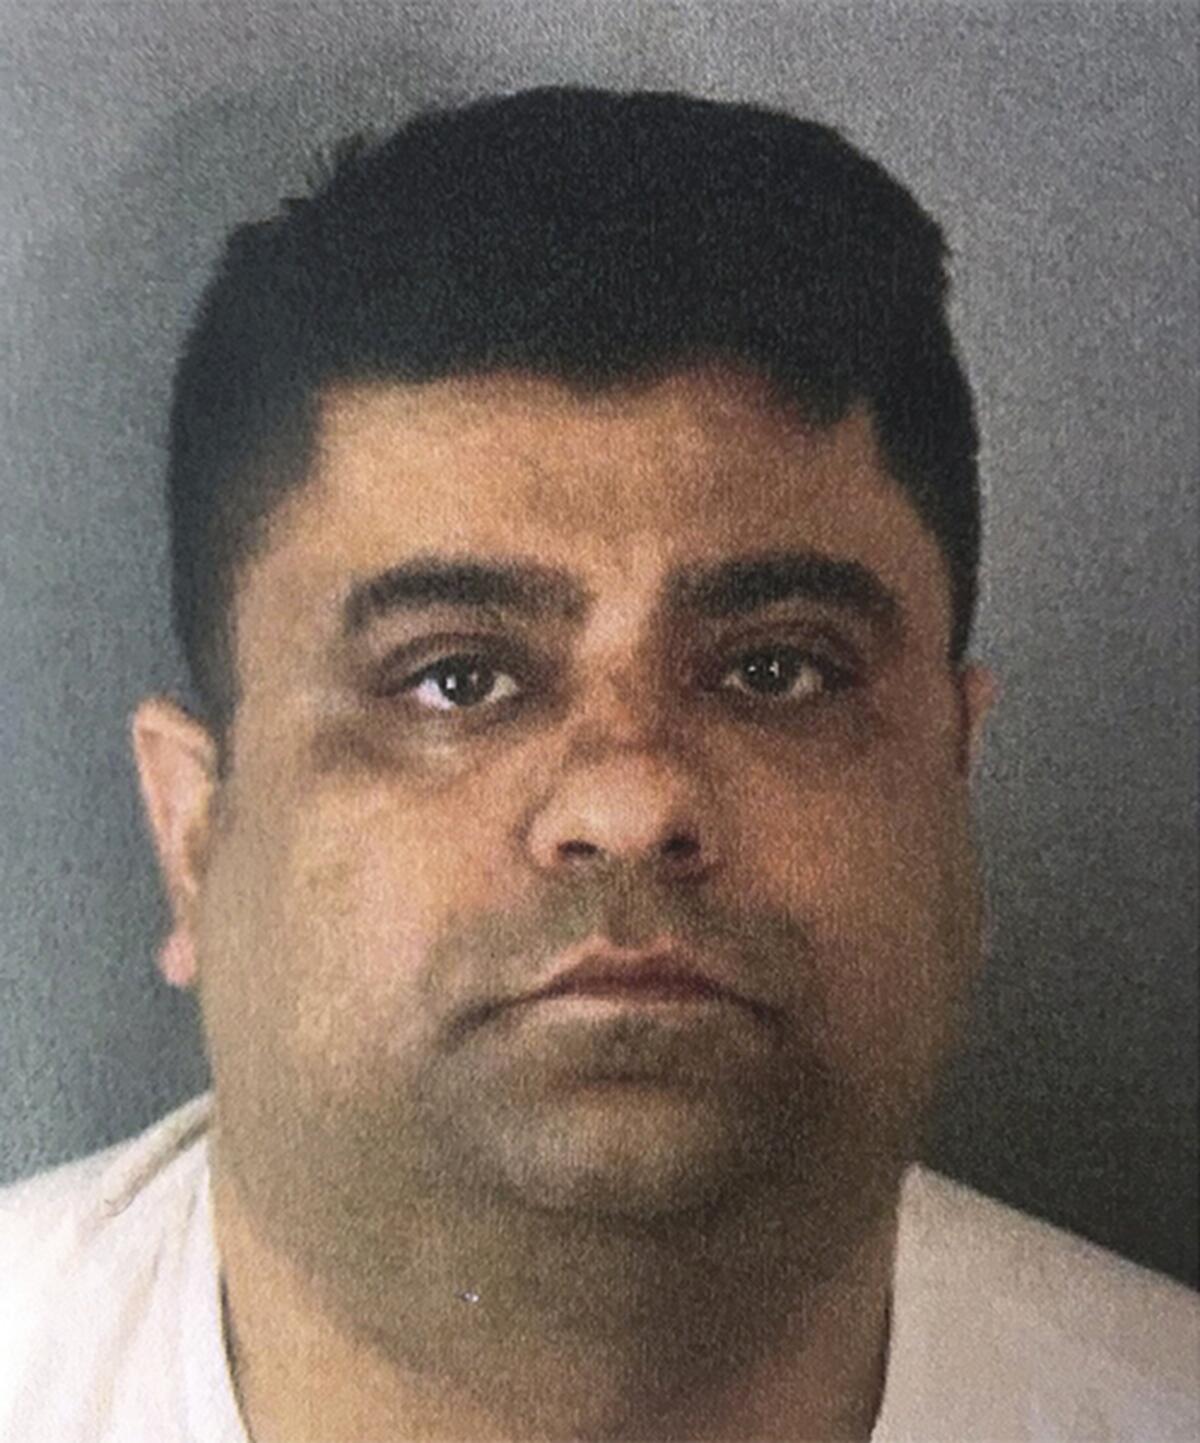 Anurag Chandra was convicted of murdering three teenage boys who played a doorbell ditch prank at his Corona home in 2020.